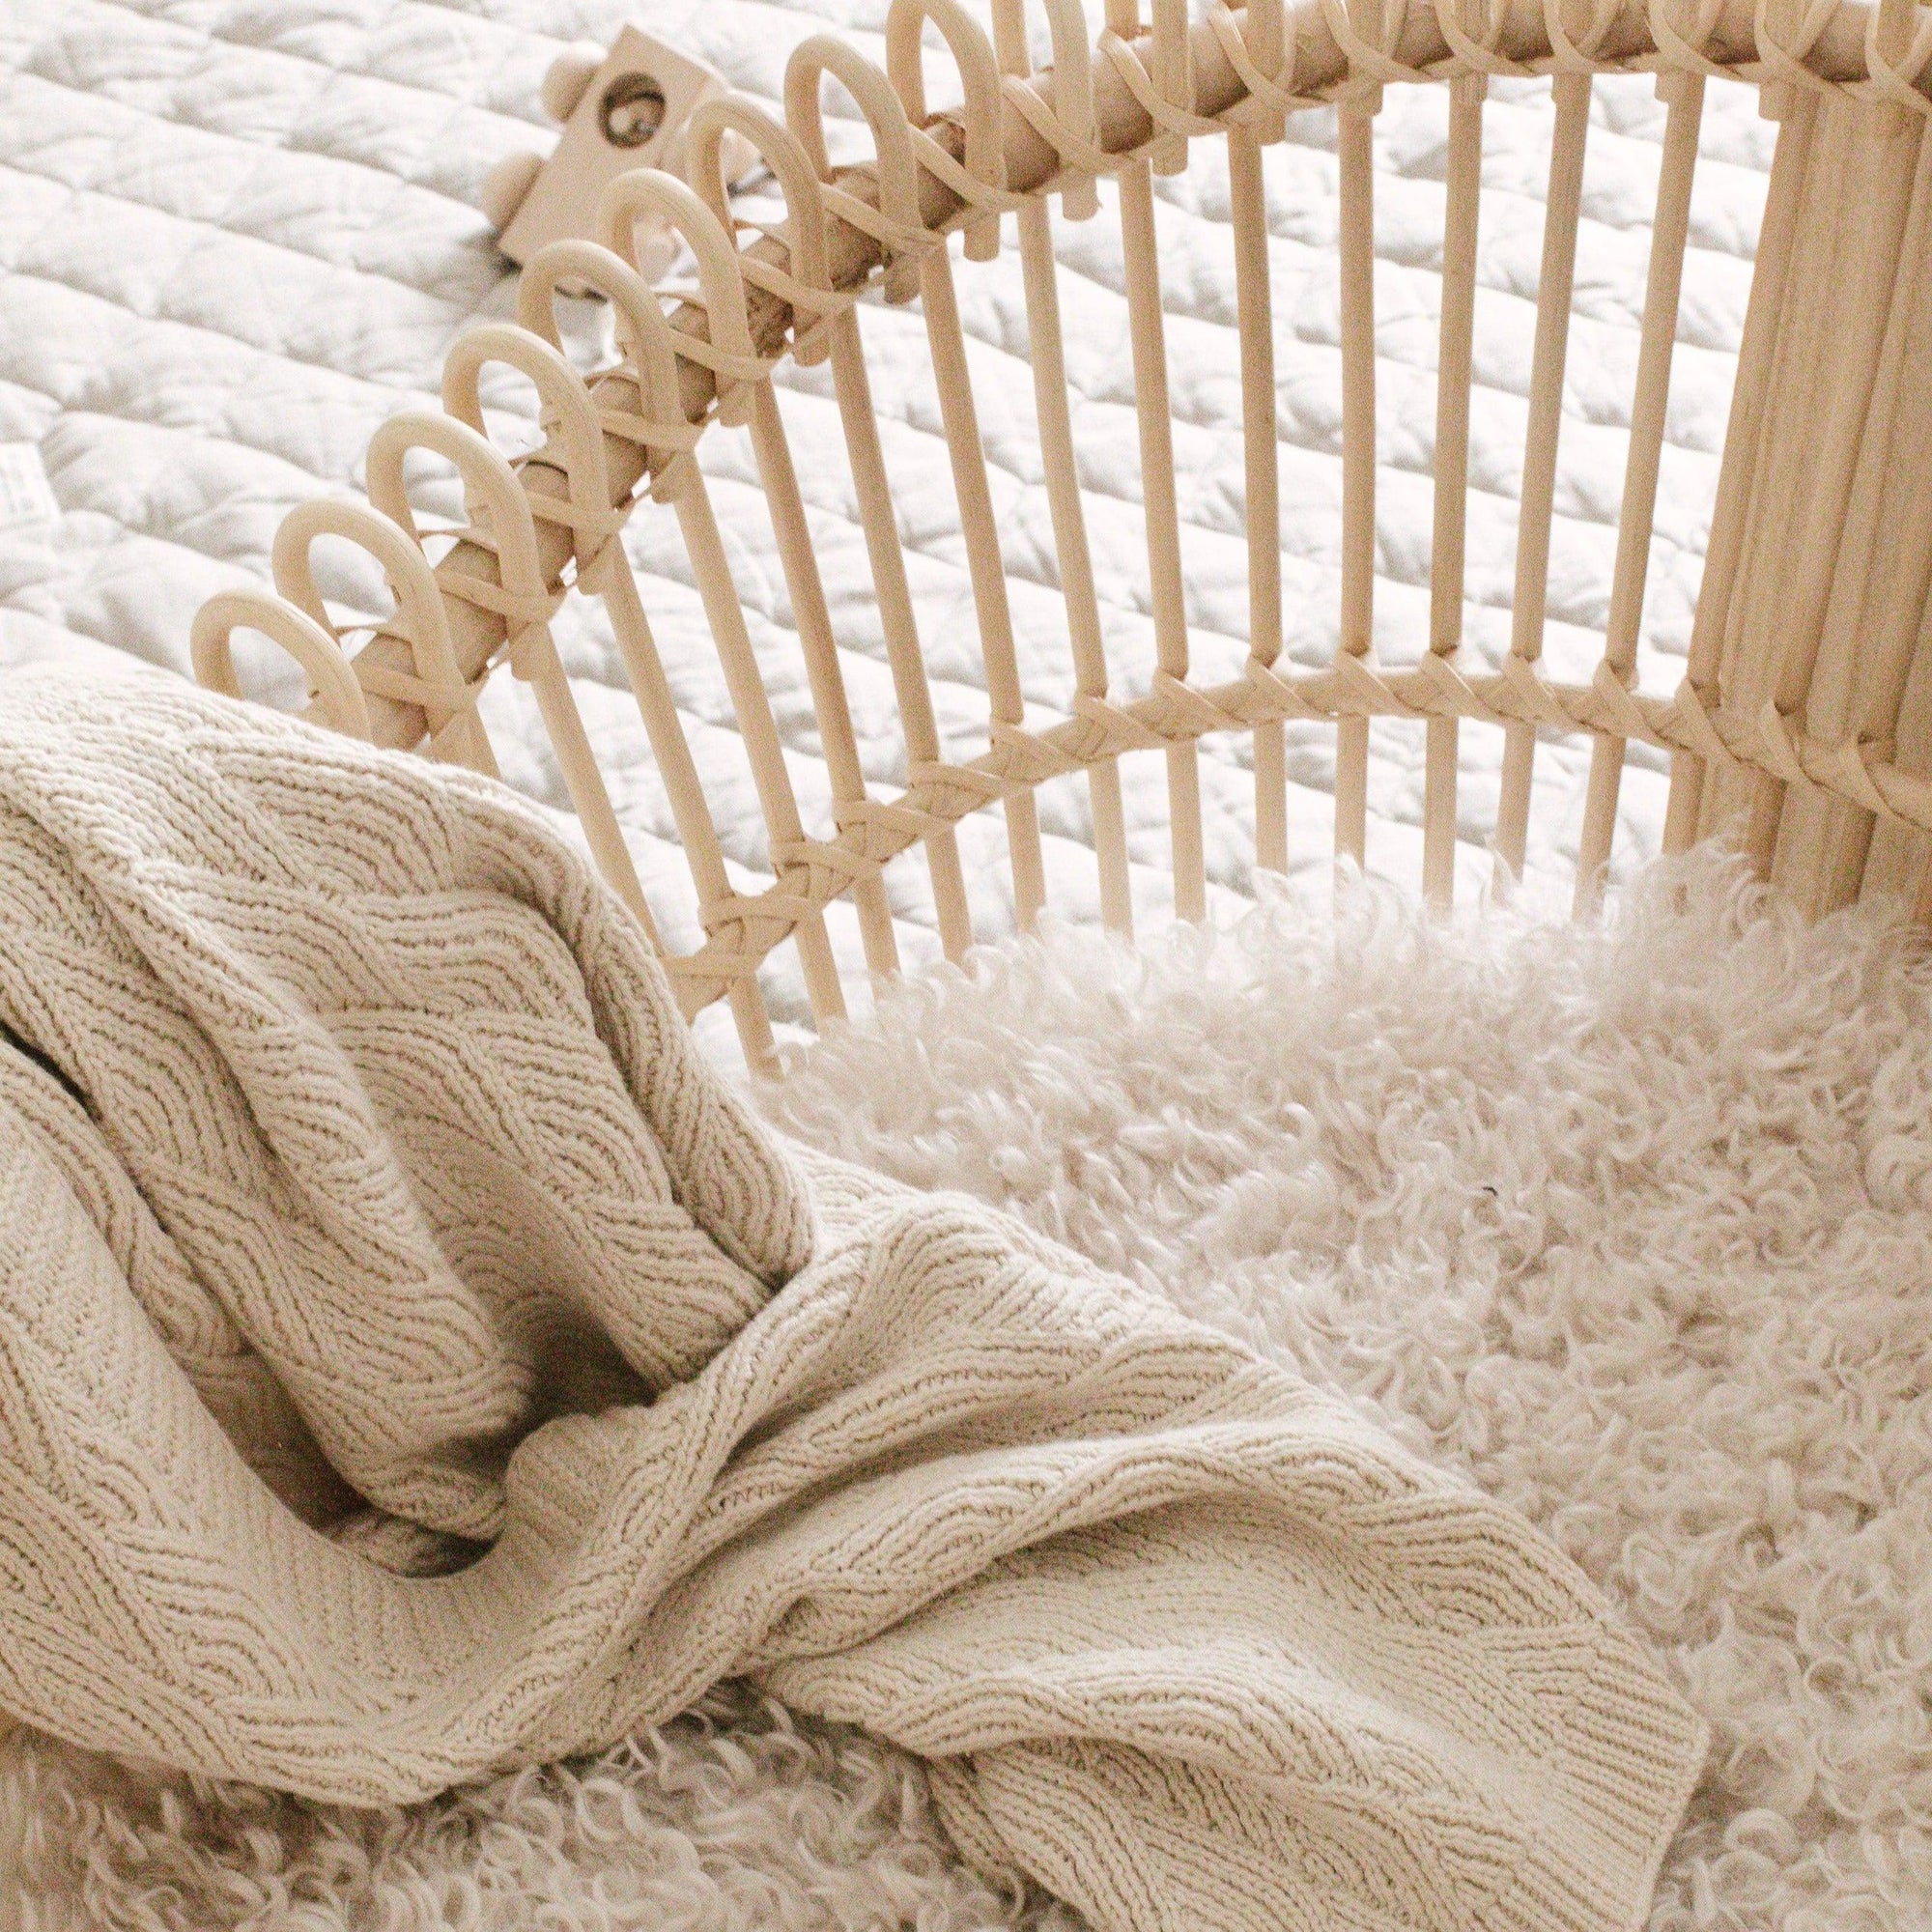 A wicker basket with a Bundl. Organic Cotton Blanket on top.